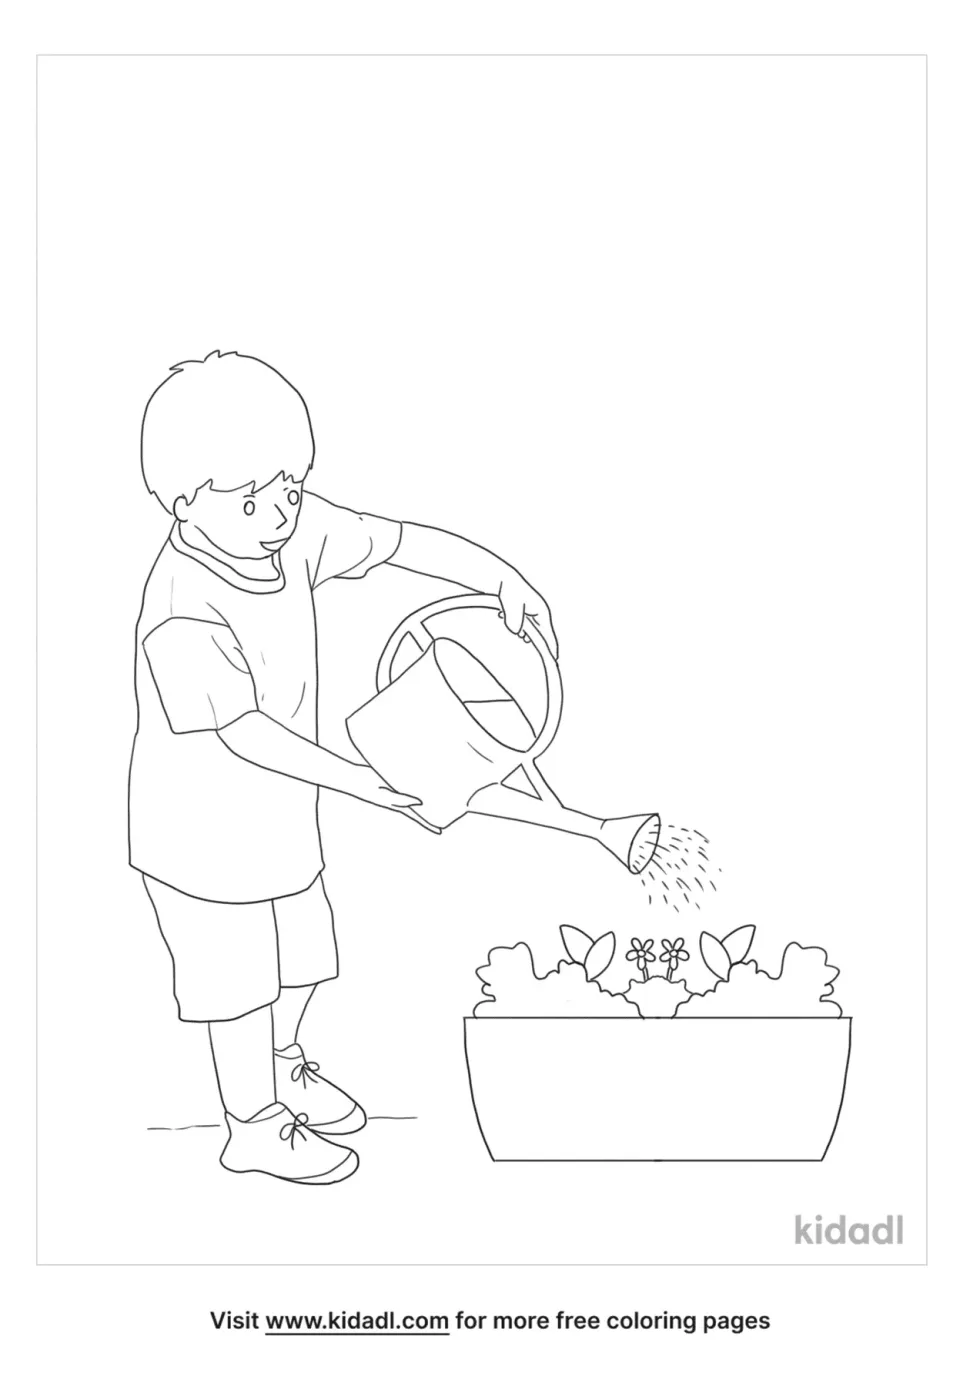 Kids At Work Coloring Page